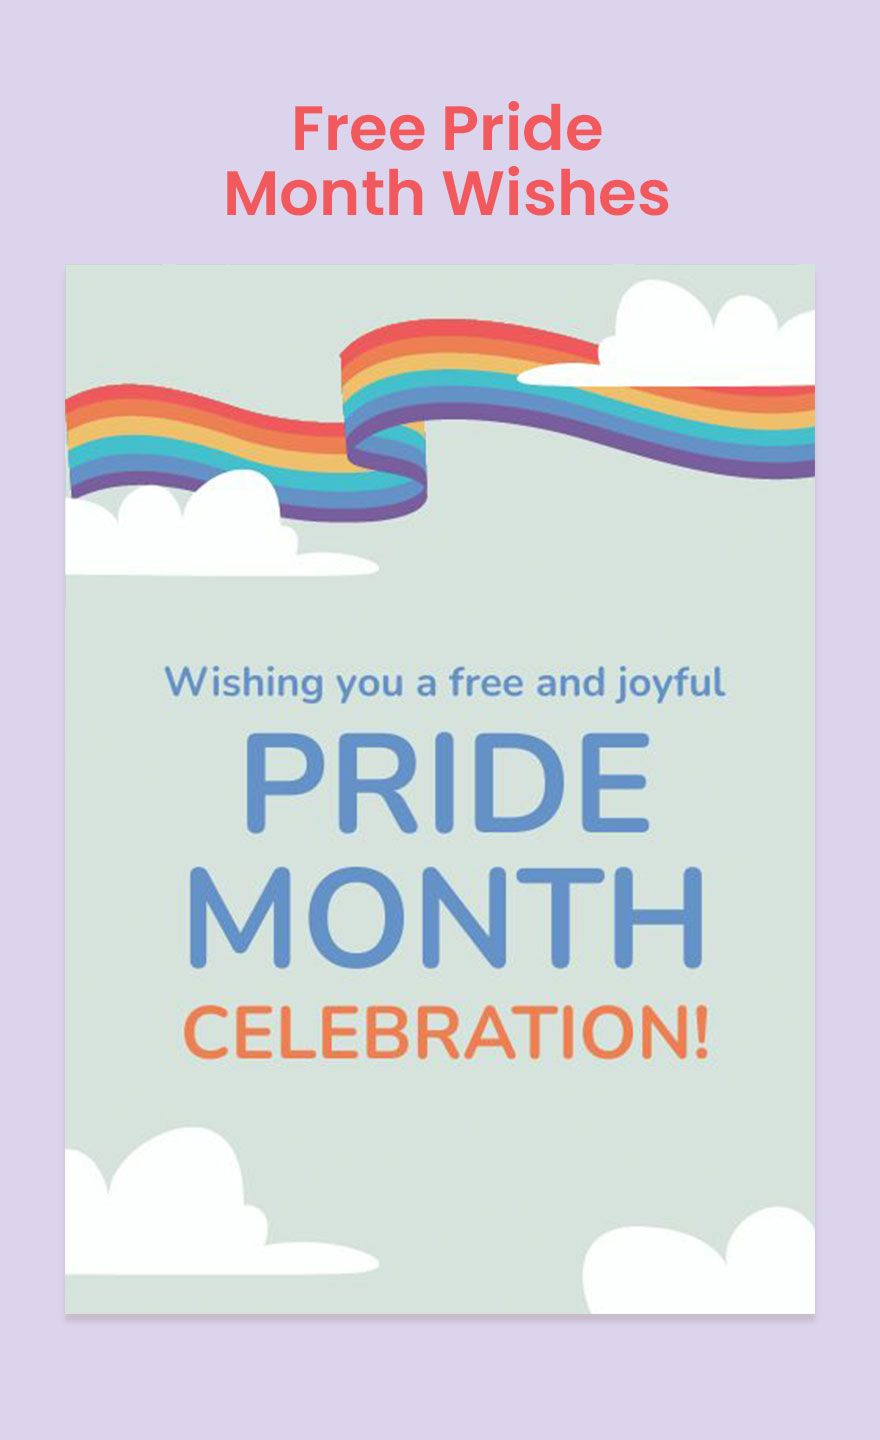 Free Pride Month Wishes in Word, Google Docs, Illustrator, PSD, EPS, SVG, PNG, JPEG